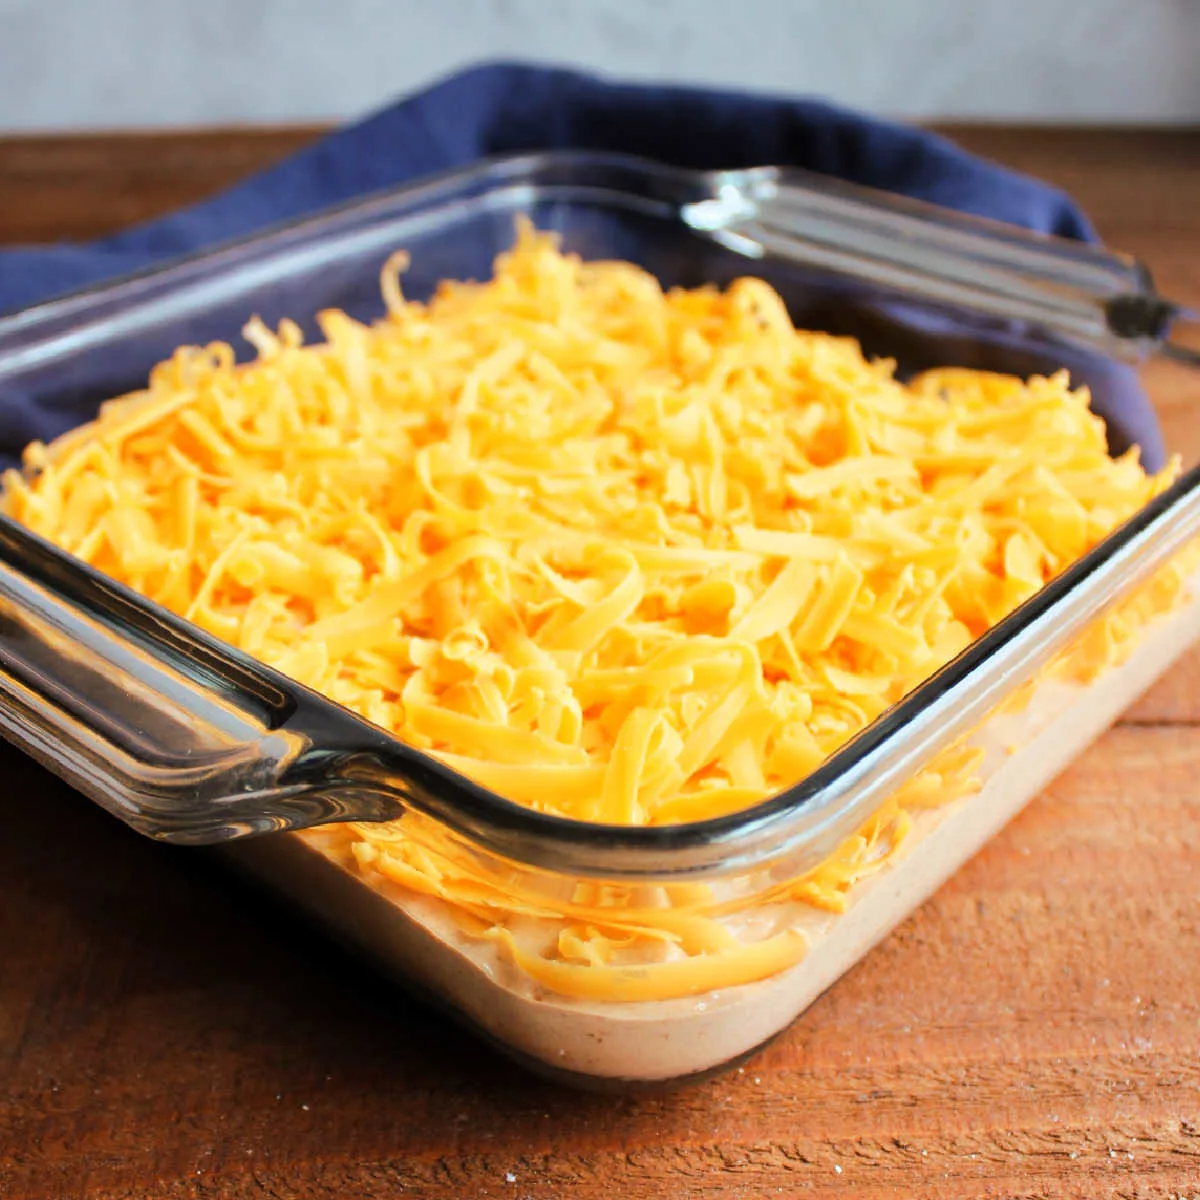 Bean mixture in glass baking dish, topped with freshly shredded cheddar cheese, ready to go in the oven.